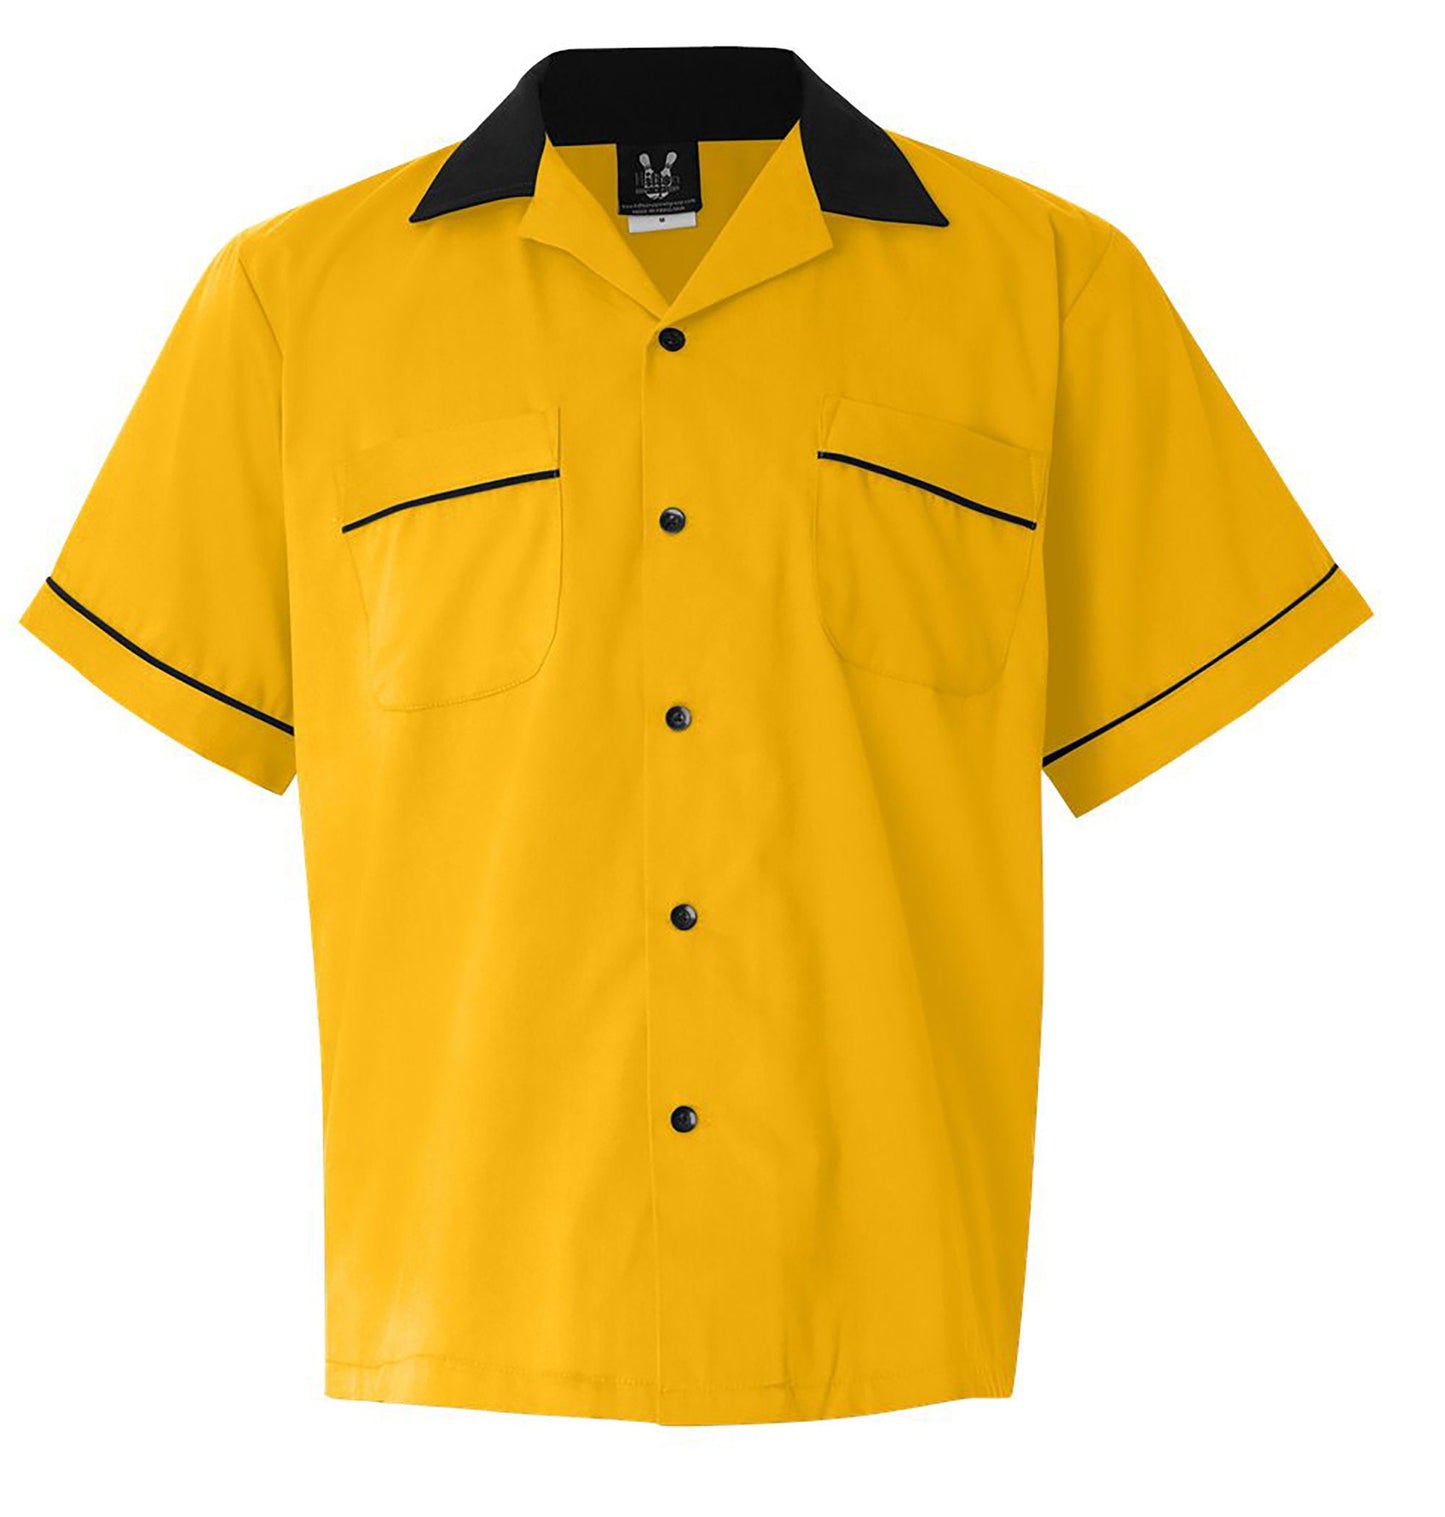 Baddabing CLub - Classic Retro Gold and Black Bowling Shirt - Classic size XL ONLY    - Includes Embroidered Name #118